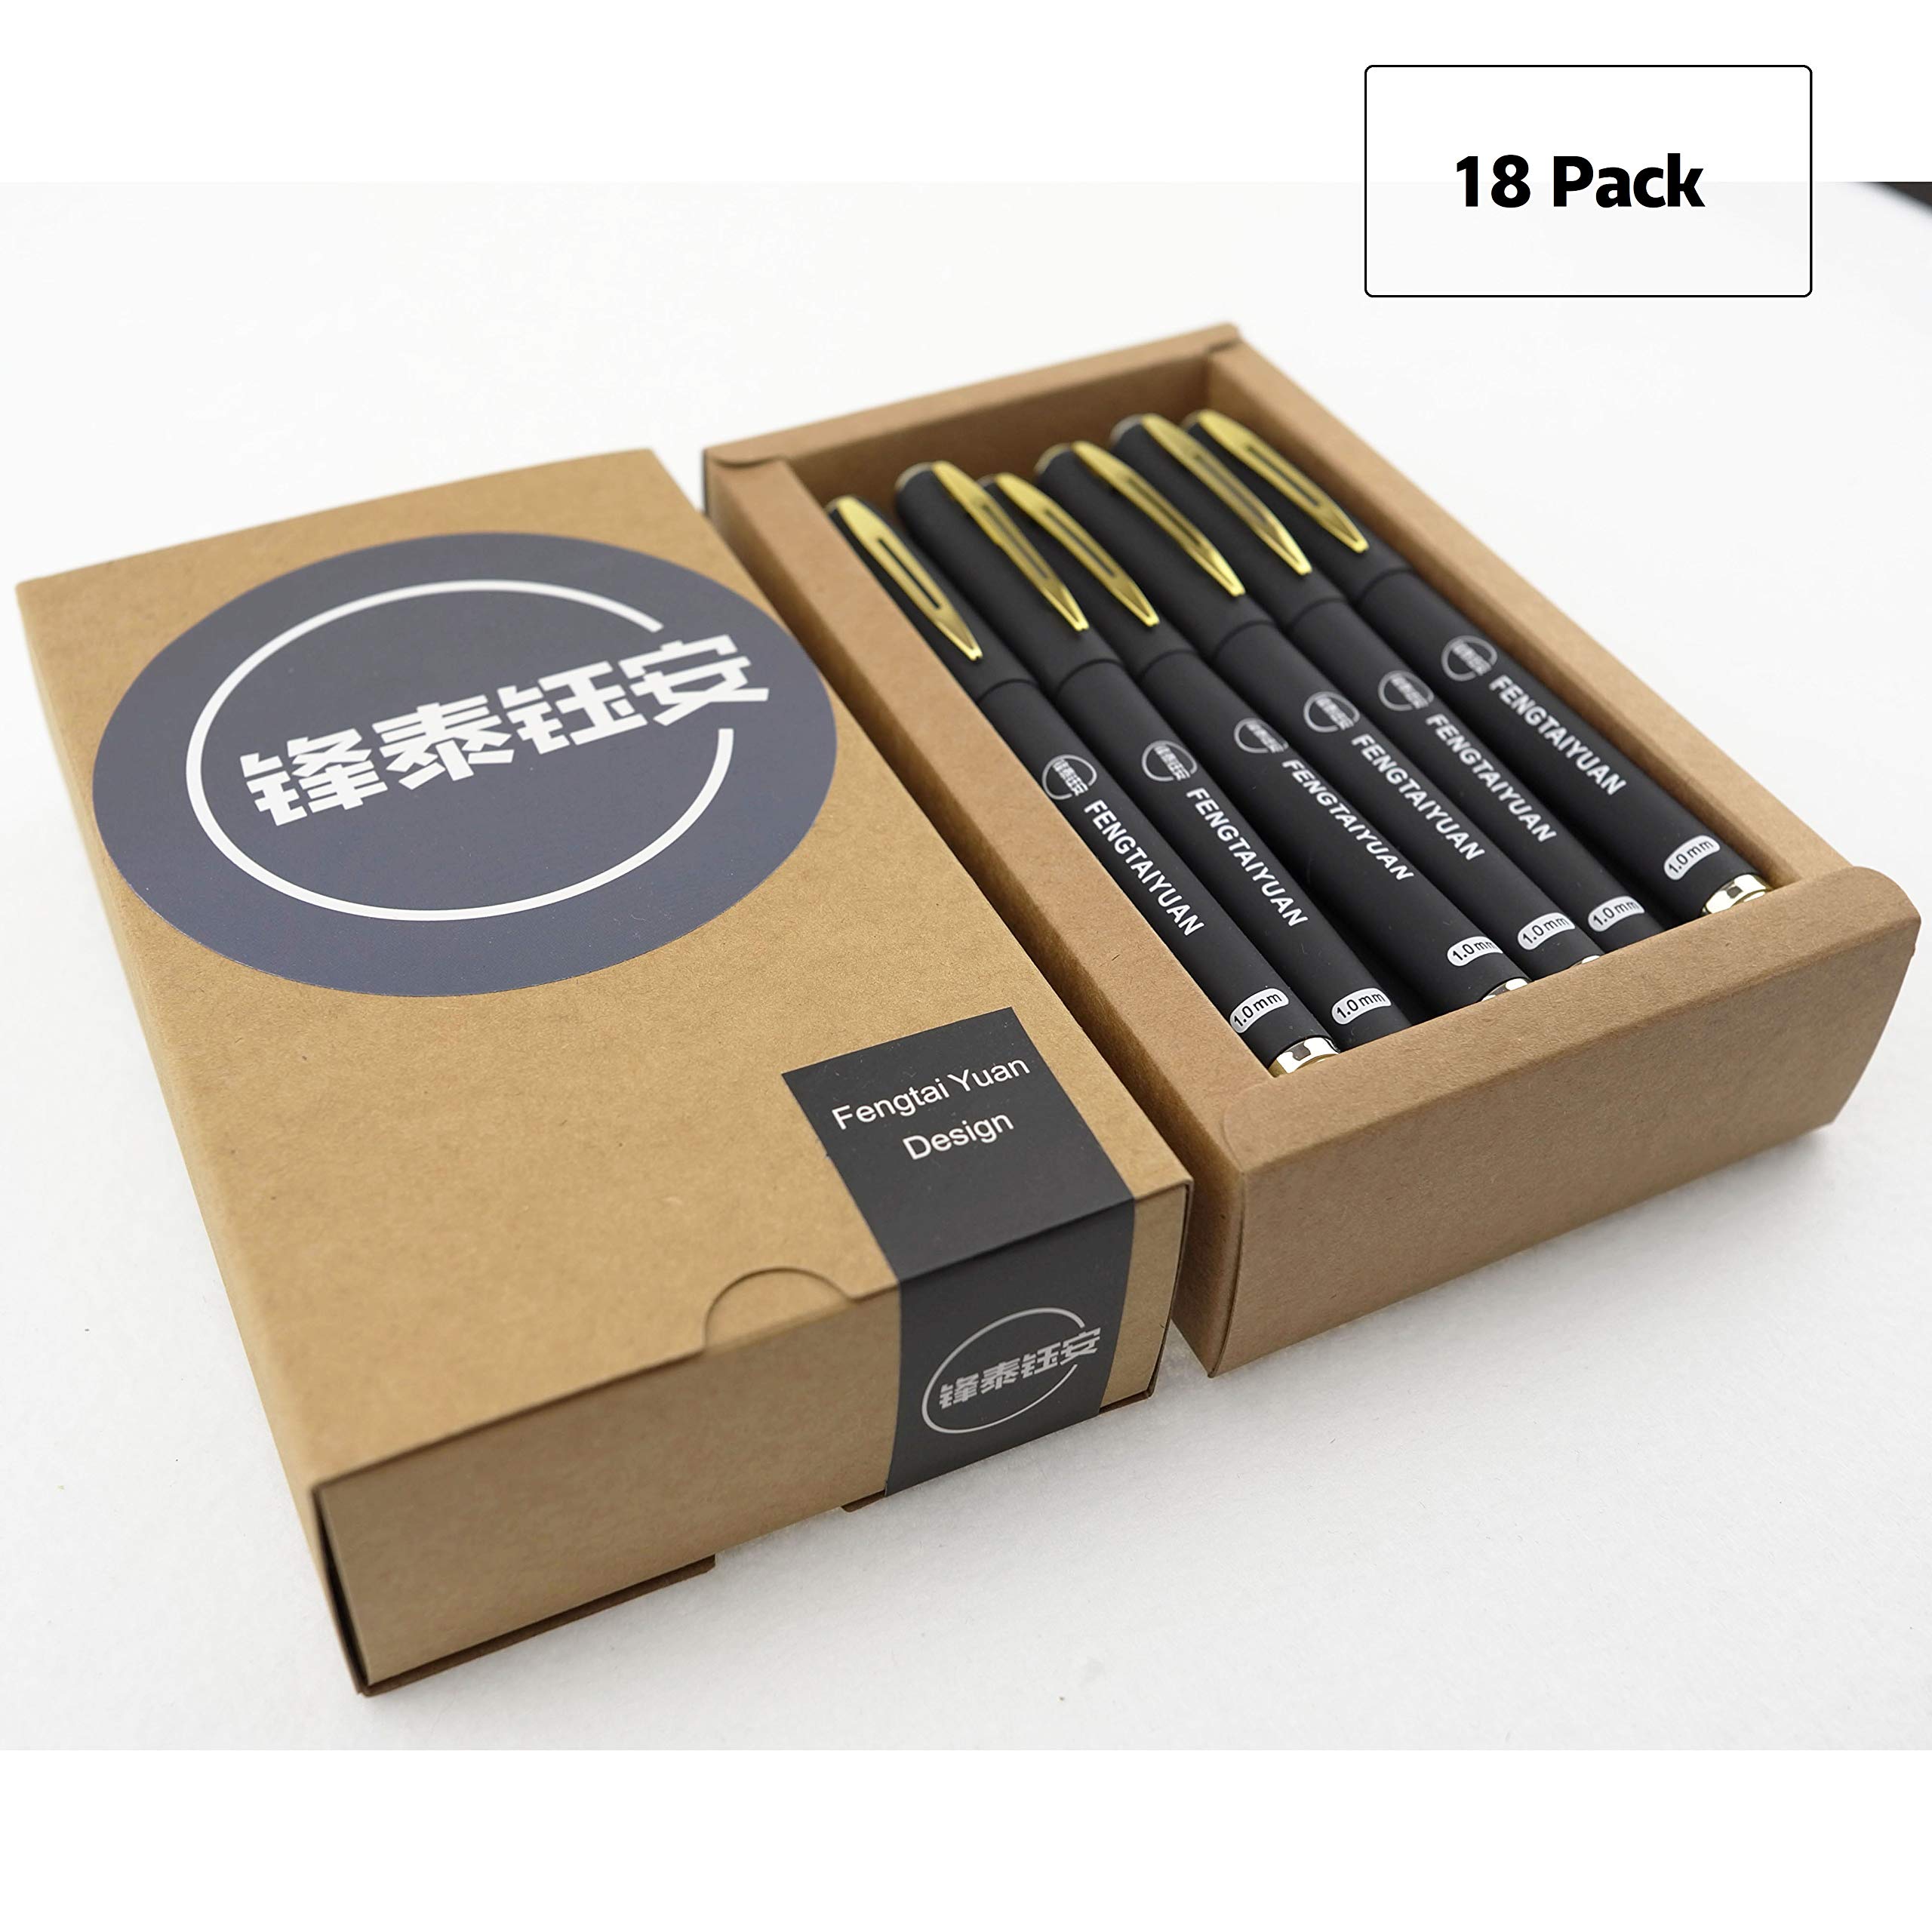 Fengtaiyuan 10P18, Black Gel Ink Rollerball Pens - Comfortable Non-Slip Grip, Black Ink, Bold Point, 1.0mm Quick-Drying Ink, 18-Piece Box (10P18)